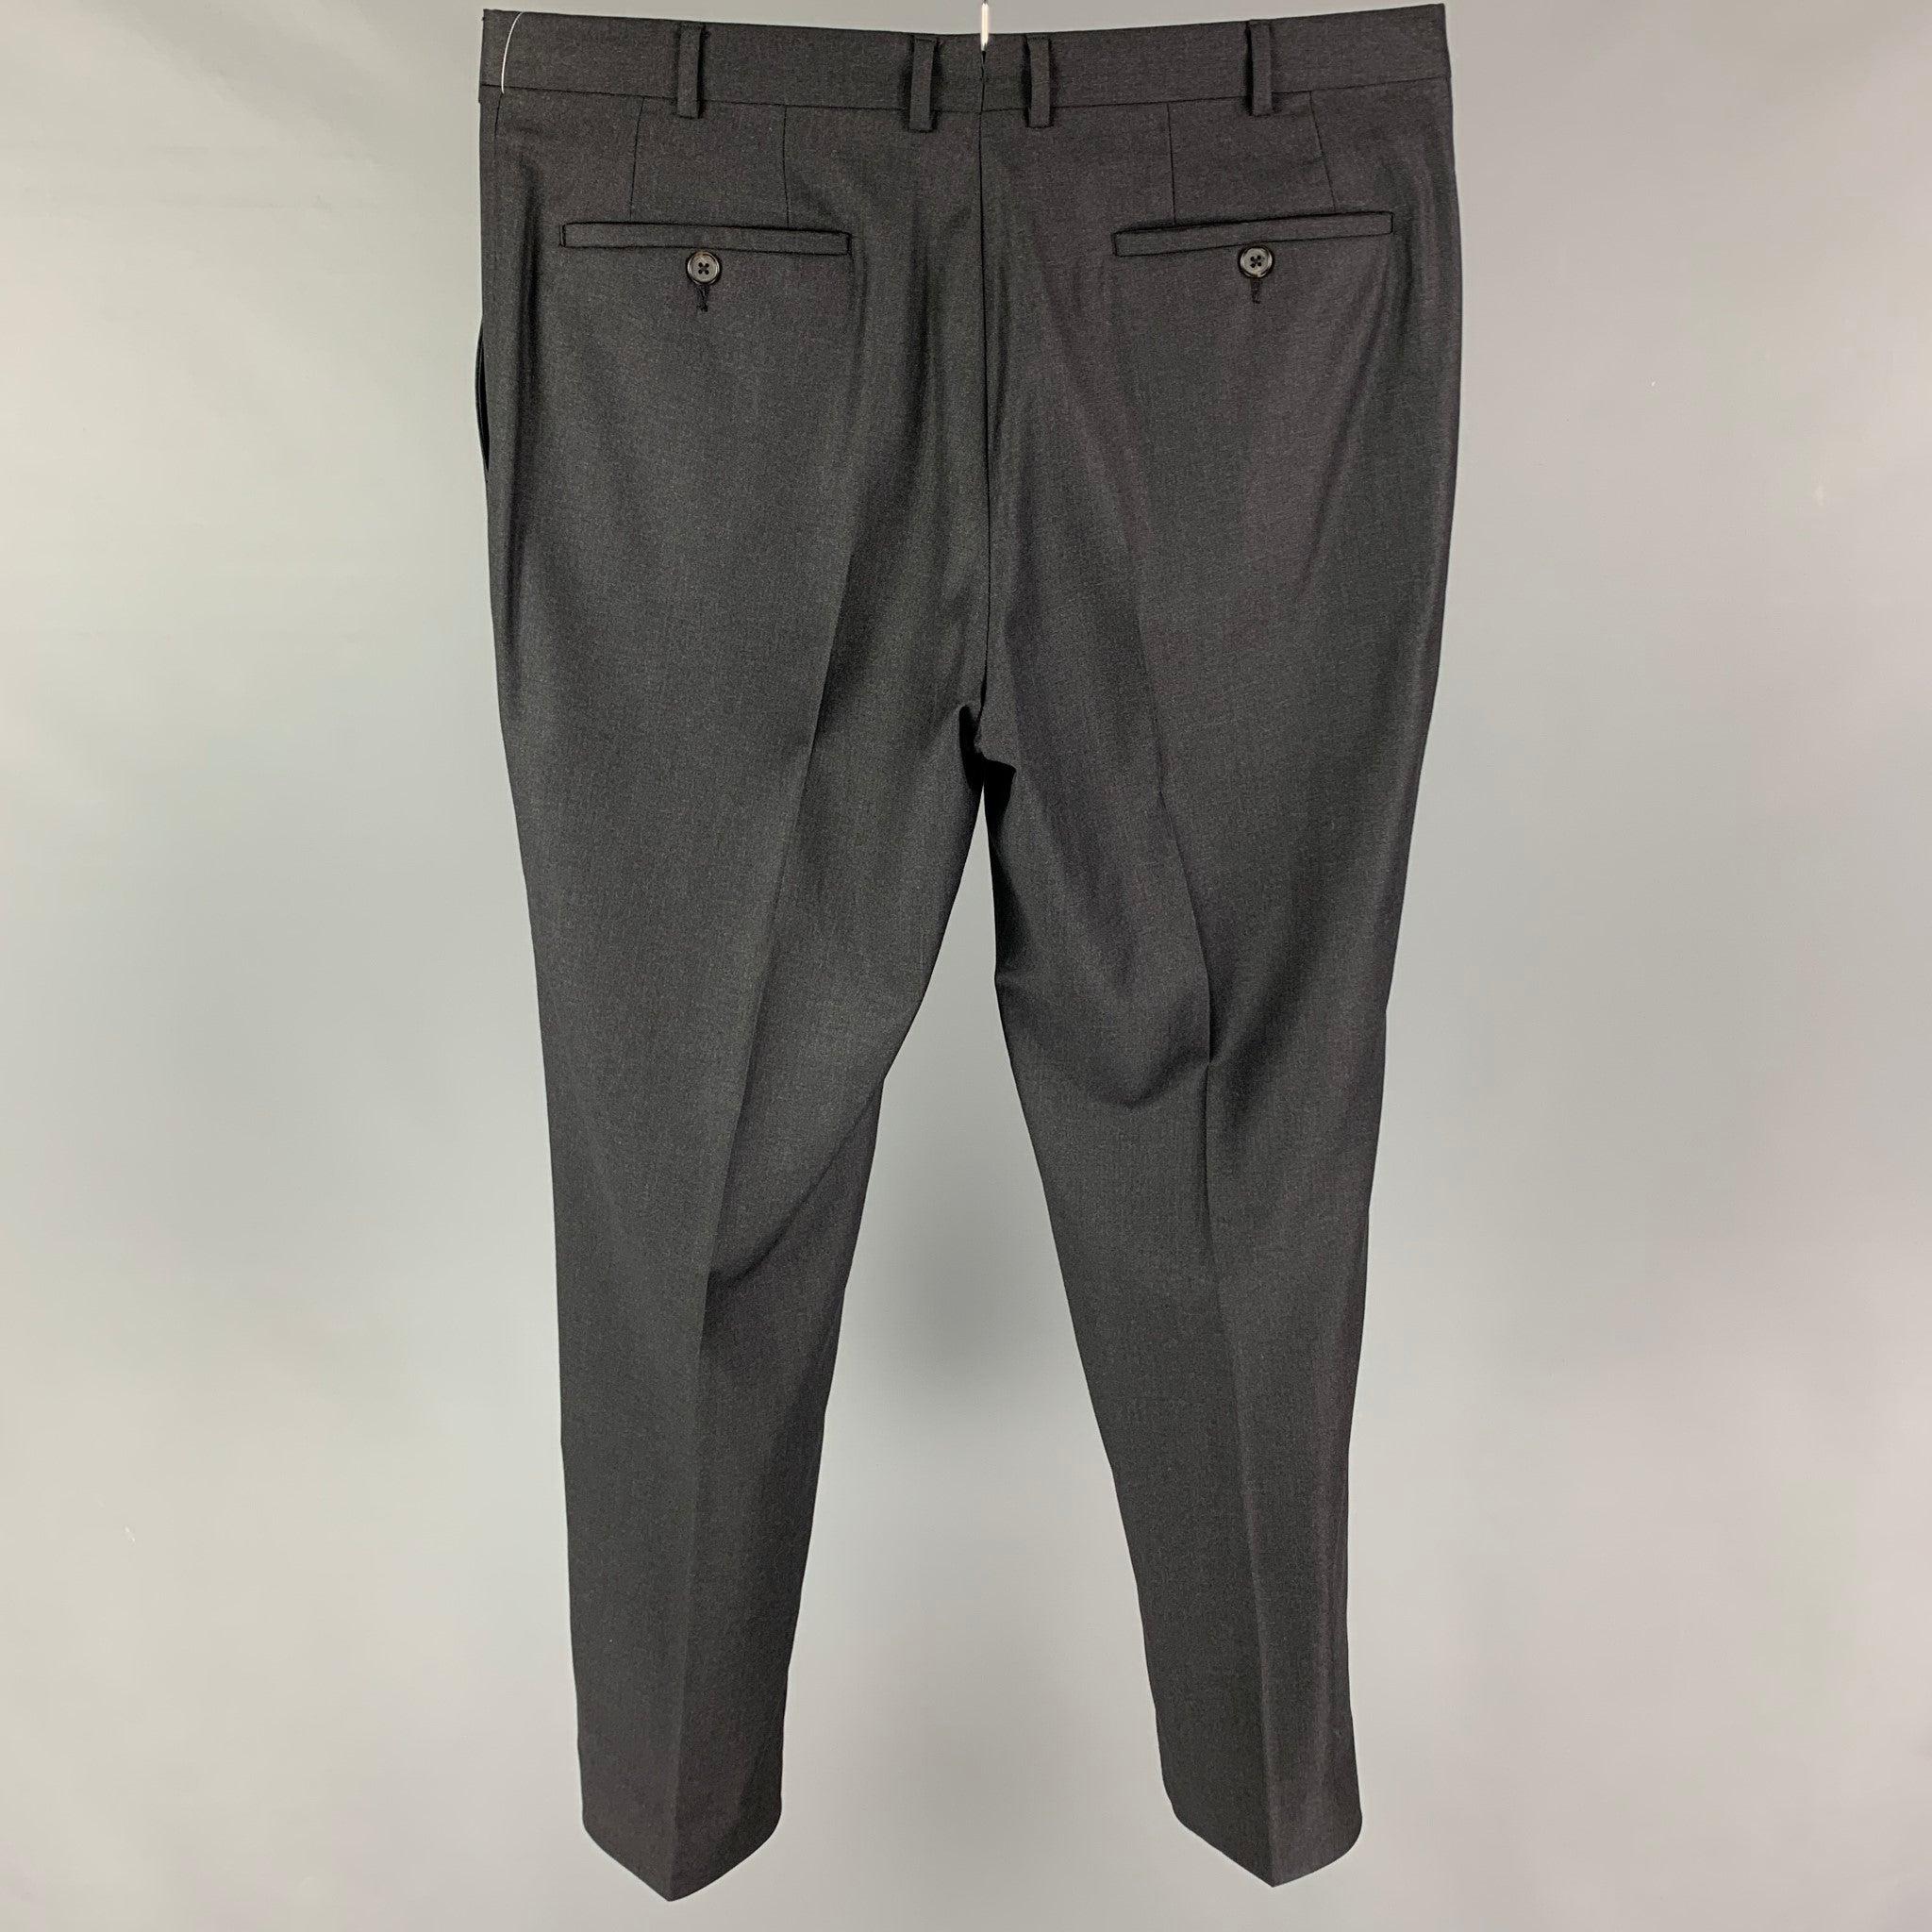 PAL ZILERI dress pants comes in a charcoal virgin wool featuring a flat front, zip fly, and a double button closure.
Very Good
Pre-Owned Condition. 

Marked:   52 

Measurements: 
  Waist: 36 inches  Rise: 10 inches  Inseam: 31 inches 

  
  
